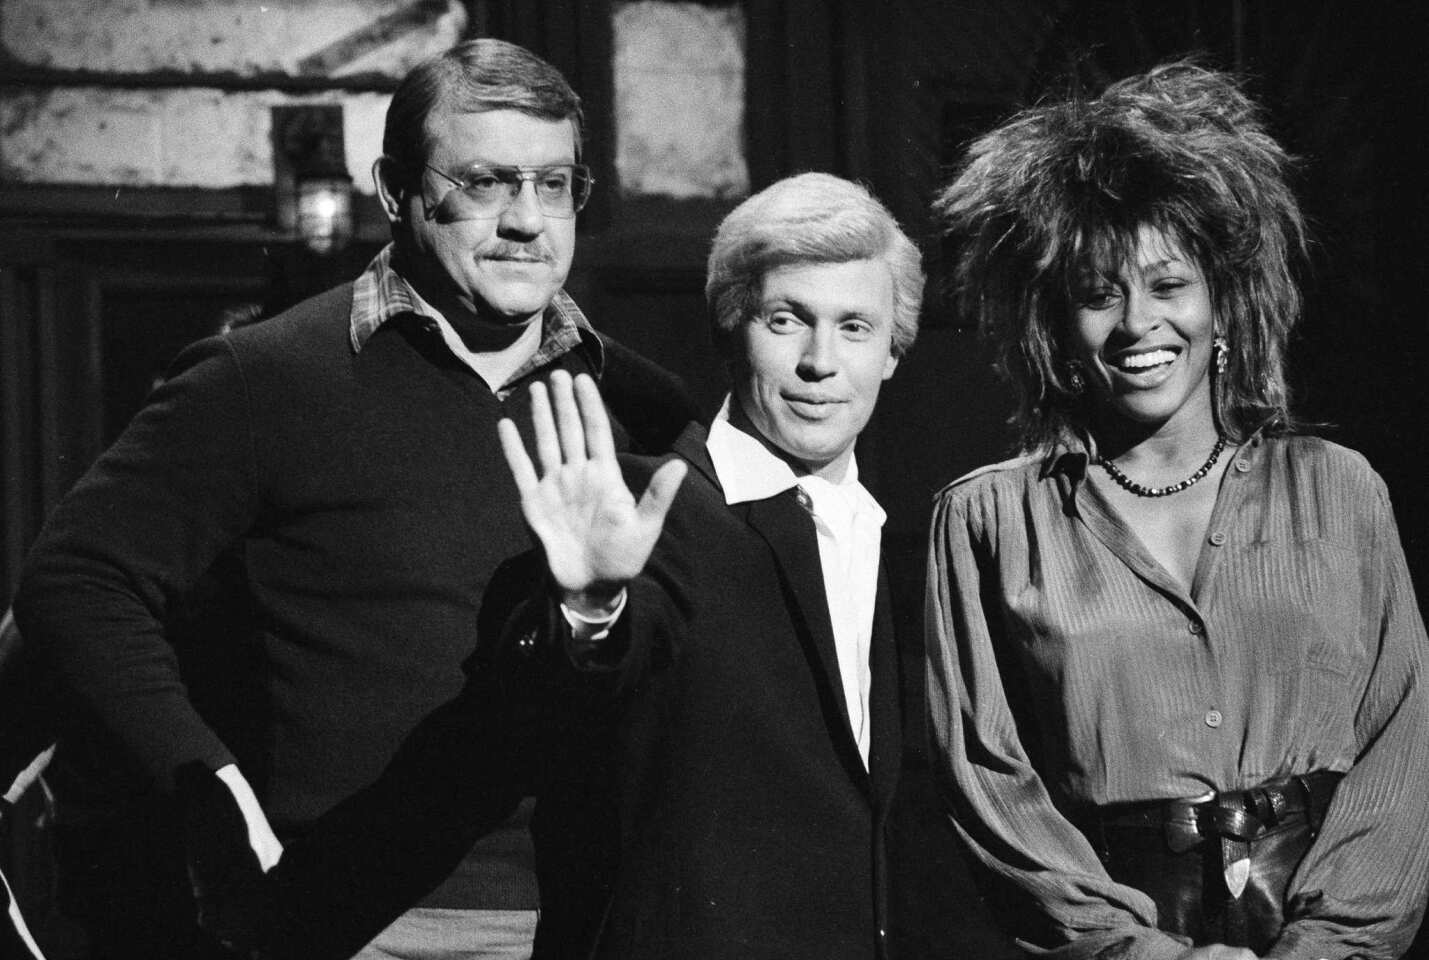 Alex Karras hosted "Saturday Night Live" in early February 1985. Shown here, during a rehearsal on Jan. 31, 1985, are Karras, Billy Crystal (in character as "Fernando") and Tina Turner.